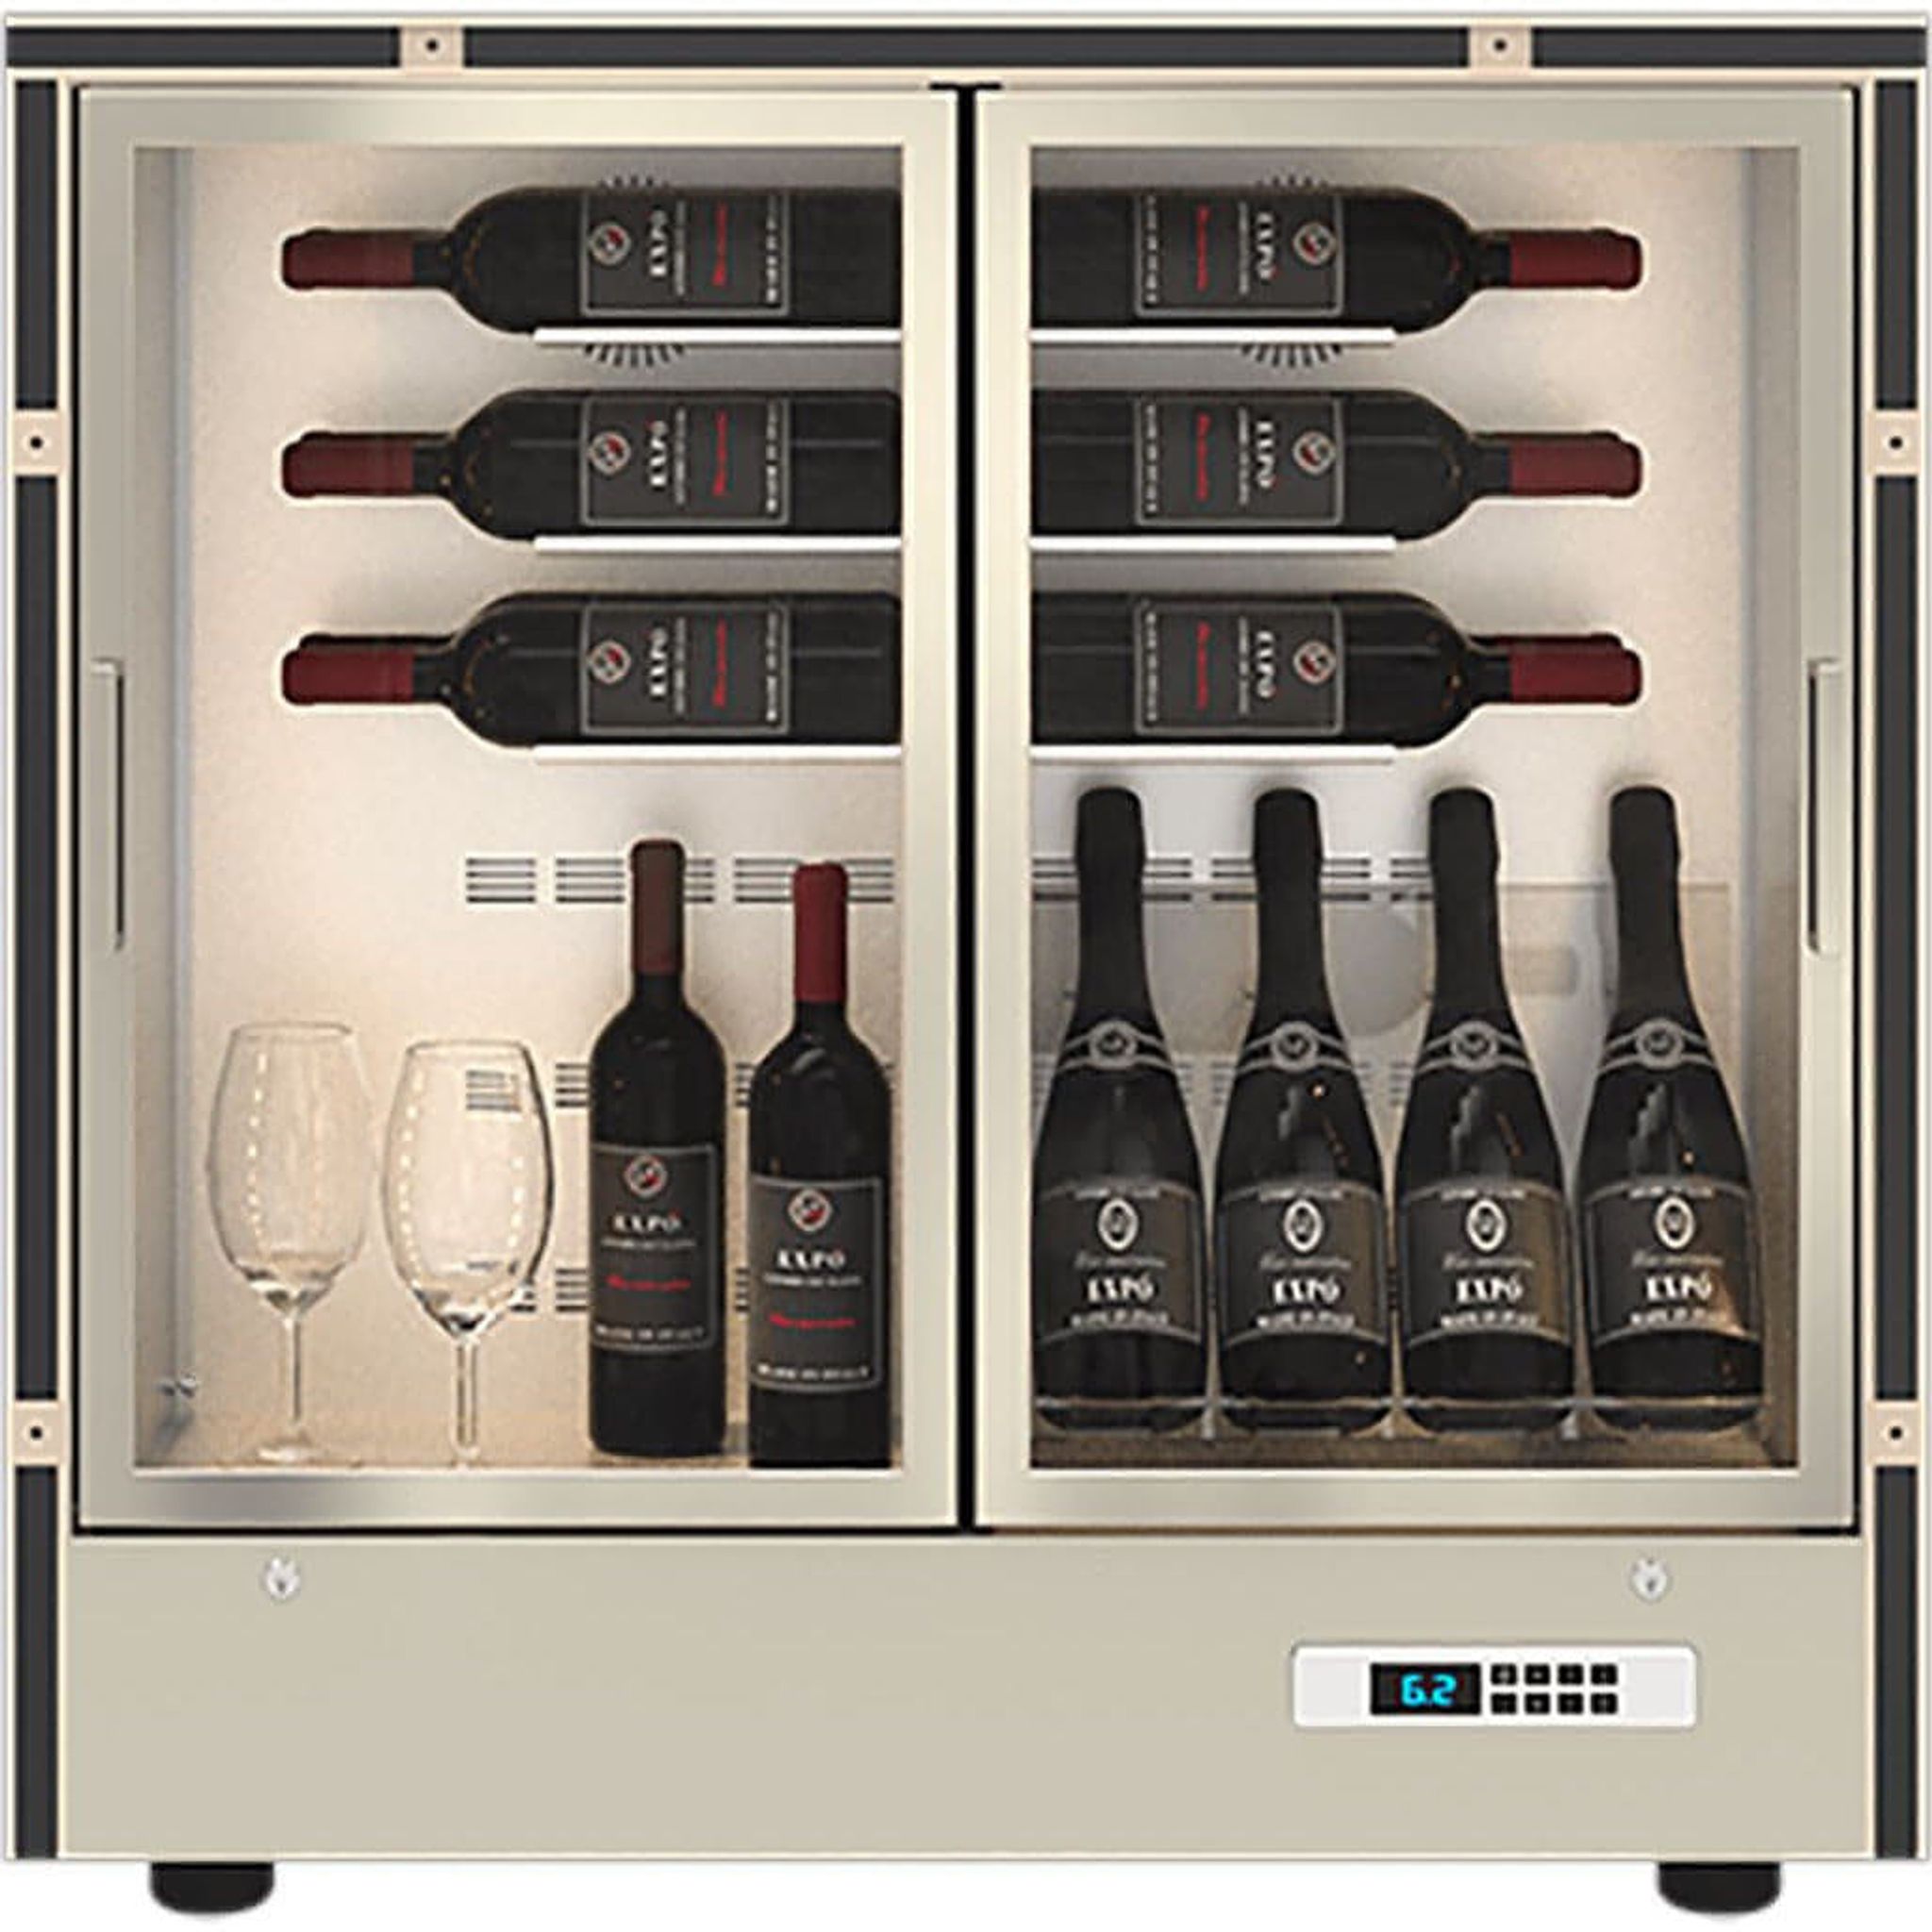 Mod 20 - Built in / Freestanding Wine Wall MD-24 - For Home Use